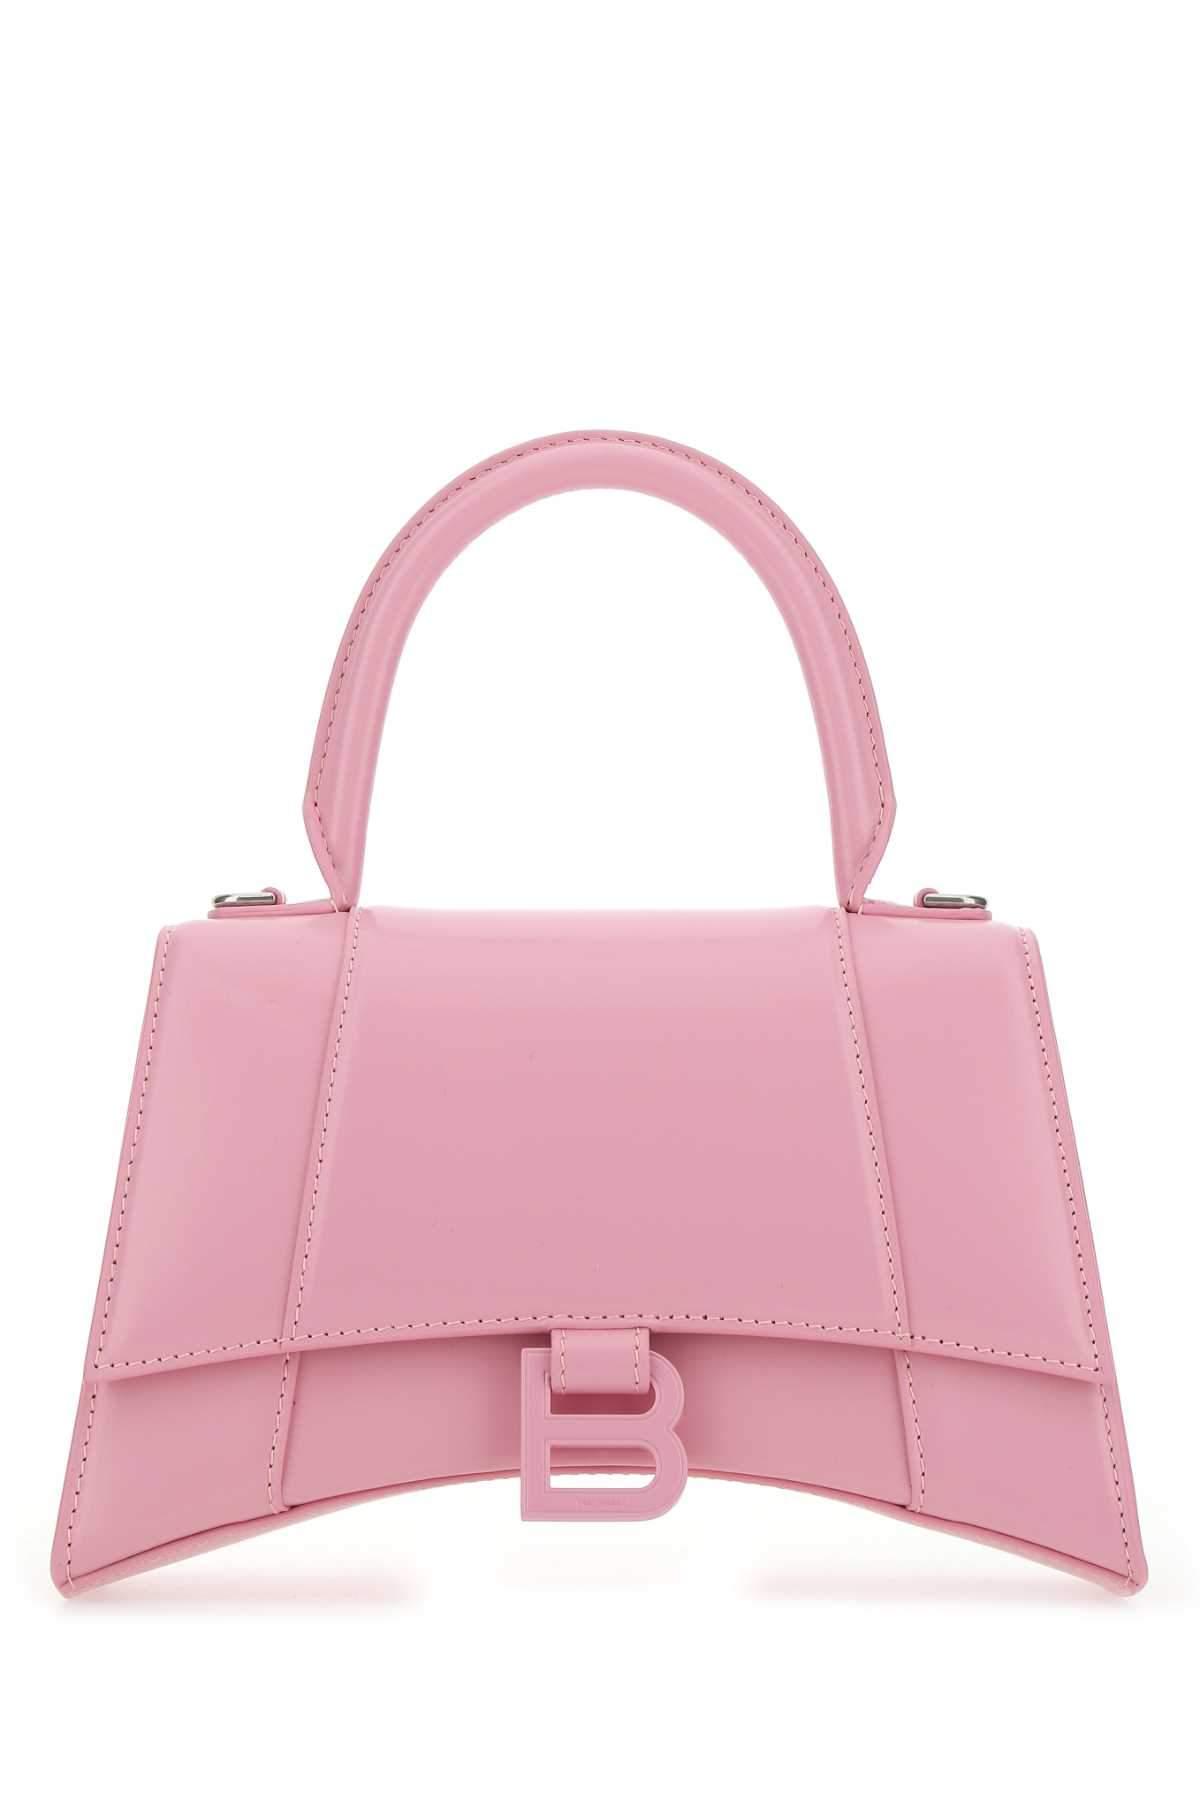 Balenciaga Hourglass Small Top Handle Bag in Pink | Lyst